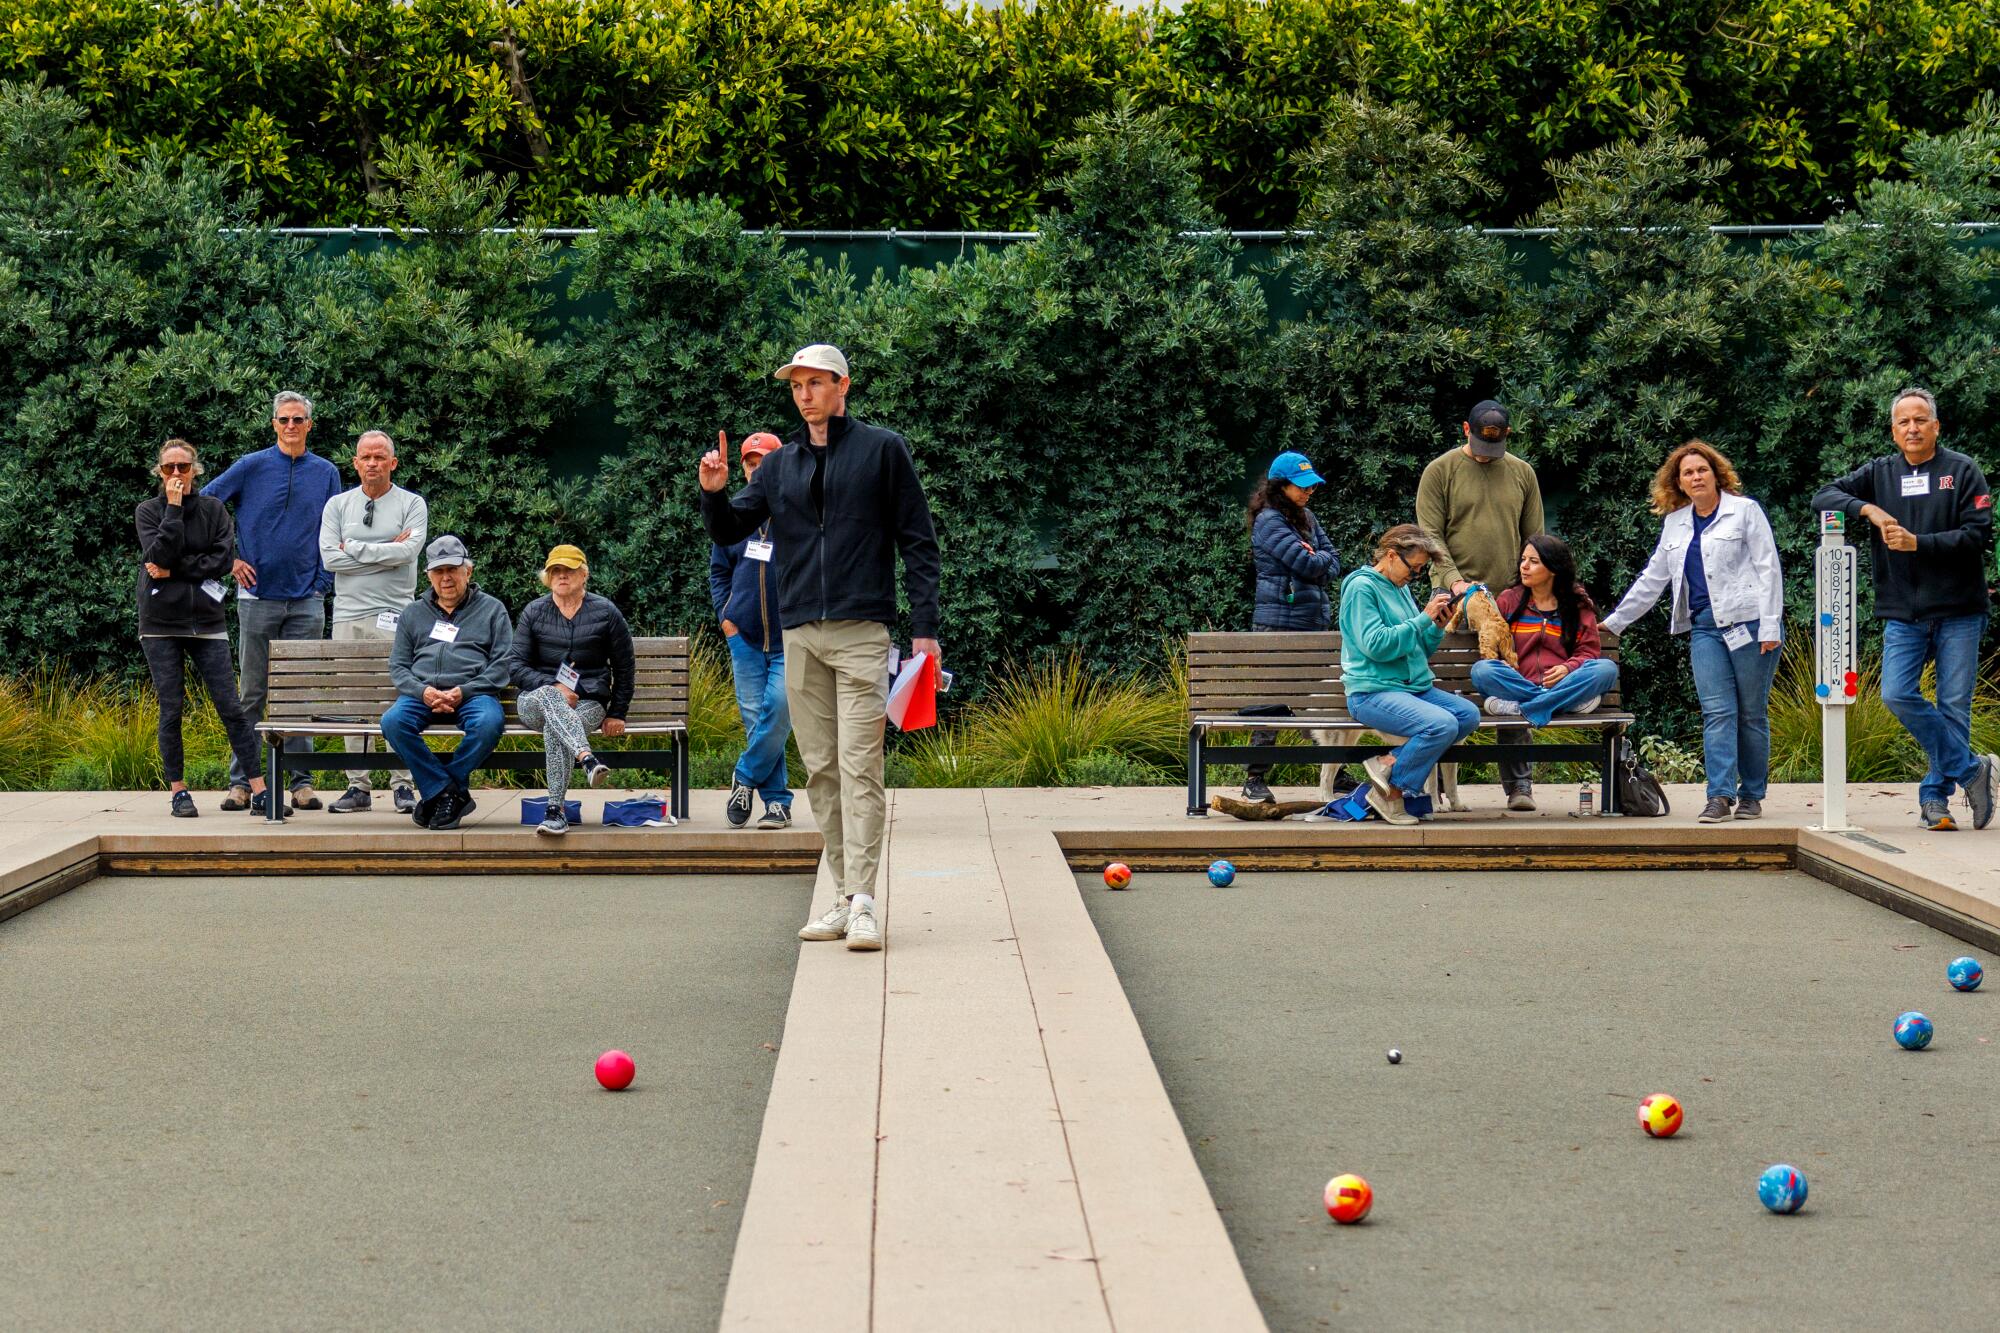 A man walking between bocce courts, counting scores as a crowd looks on.